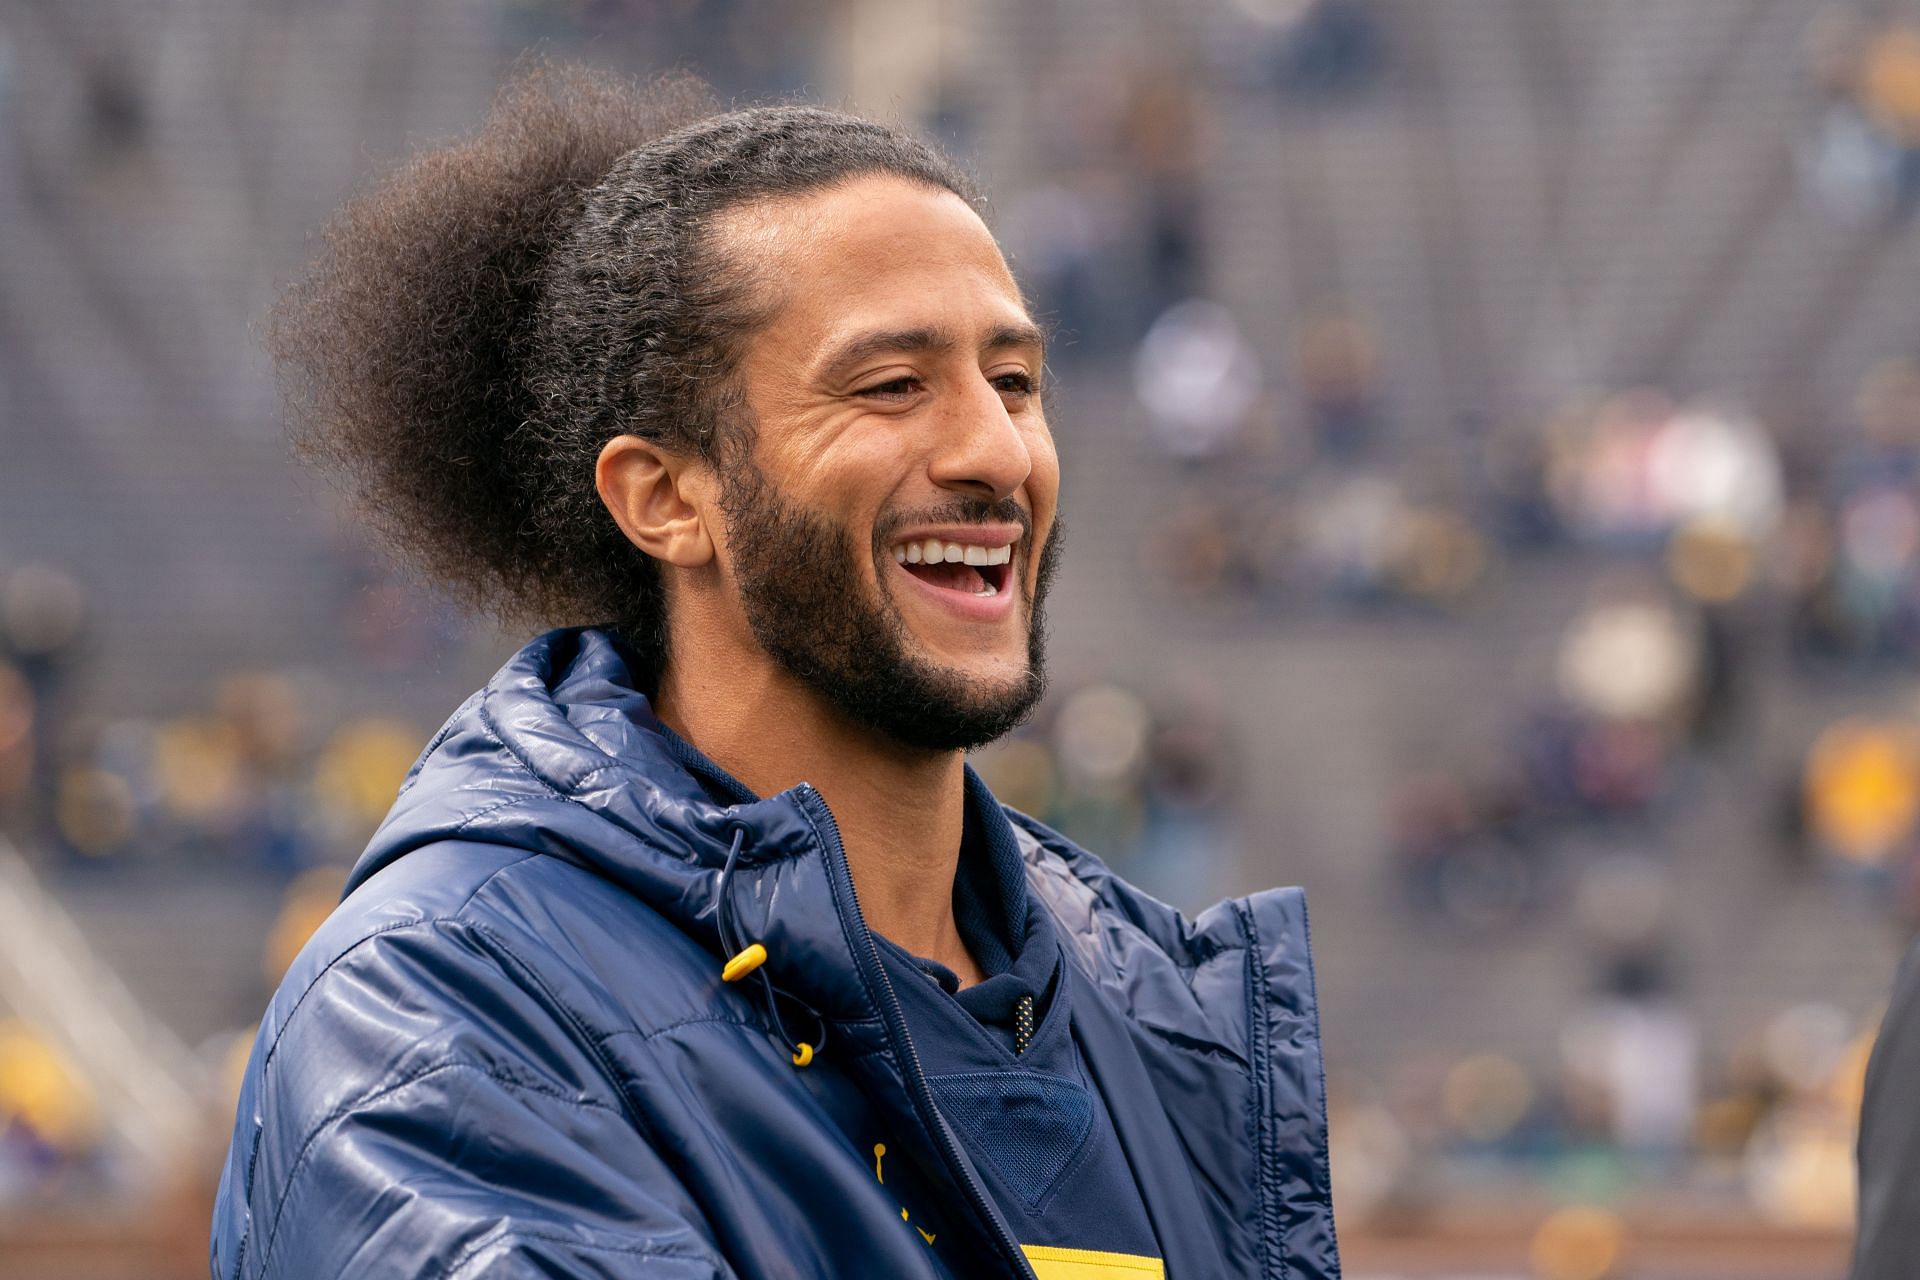 Is Colin Kaepernick bad for business in the NFL?